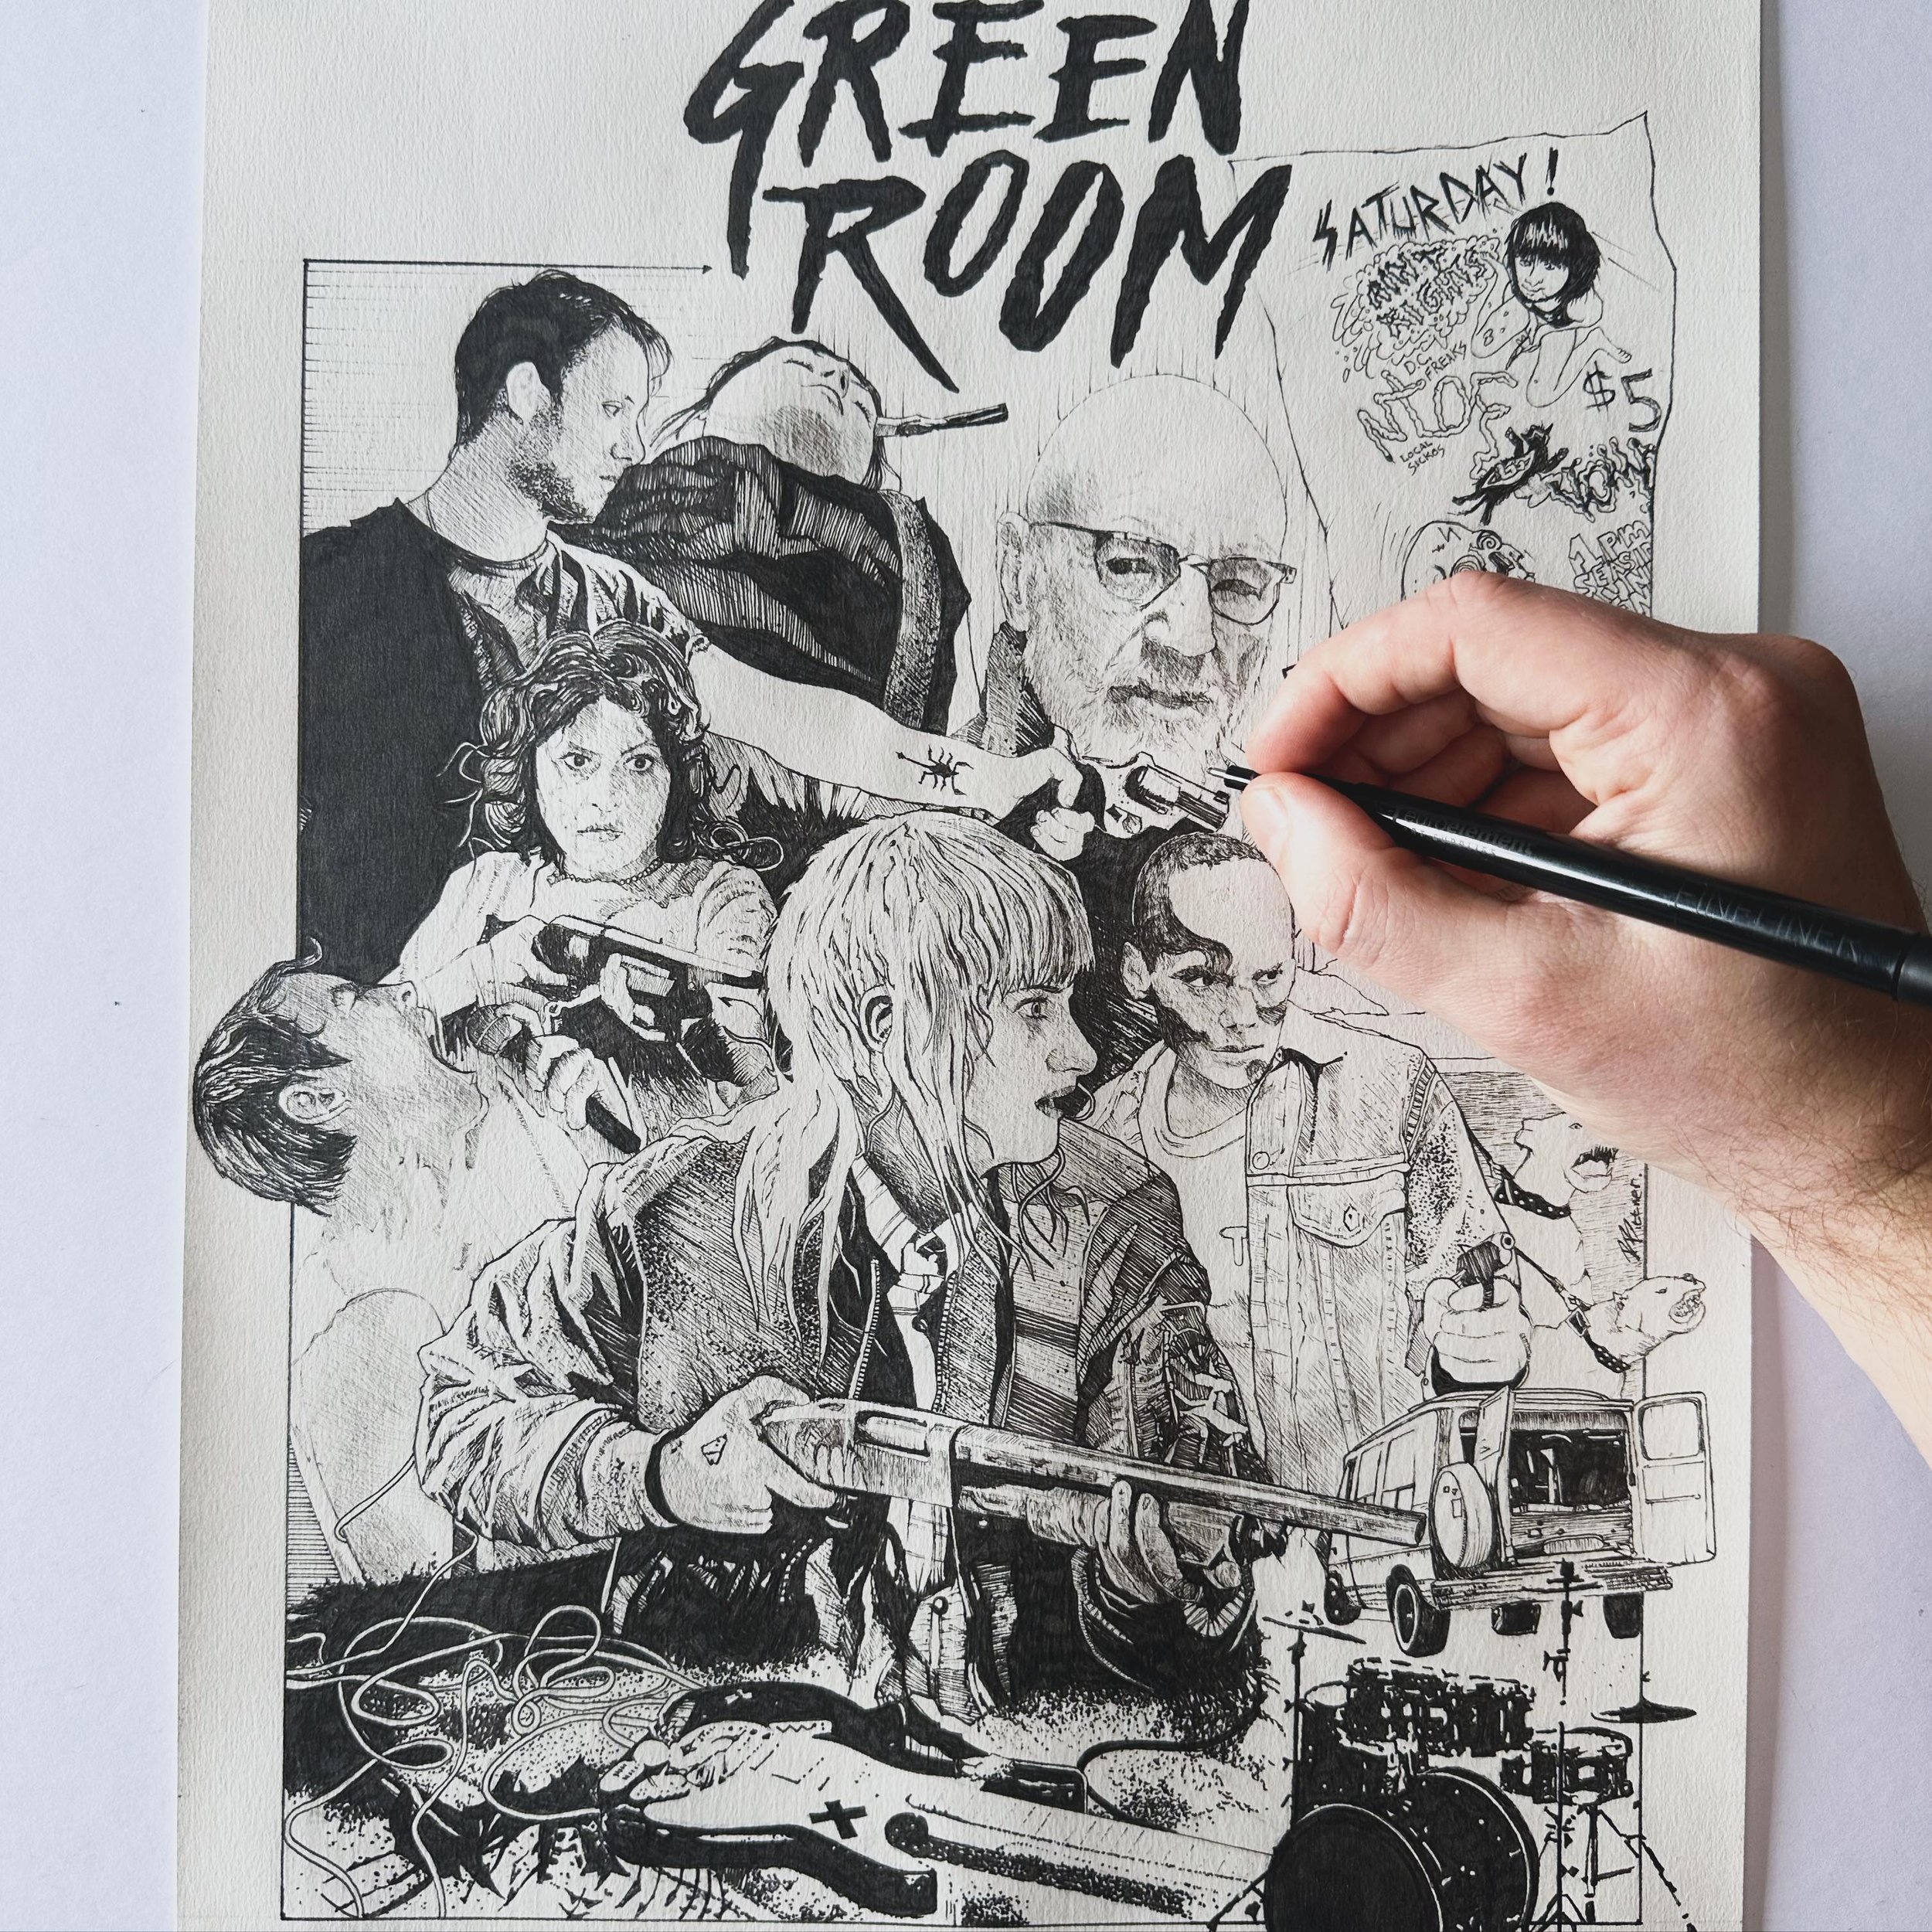 Green Room (2015), pen on paper. 🙂

#a24 #a24films #a24movies #greenroommovie #greenroom2015 #horrormovies #horrorfilms #horrorthriller #thrillermovies